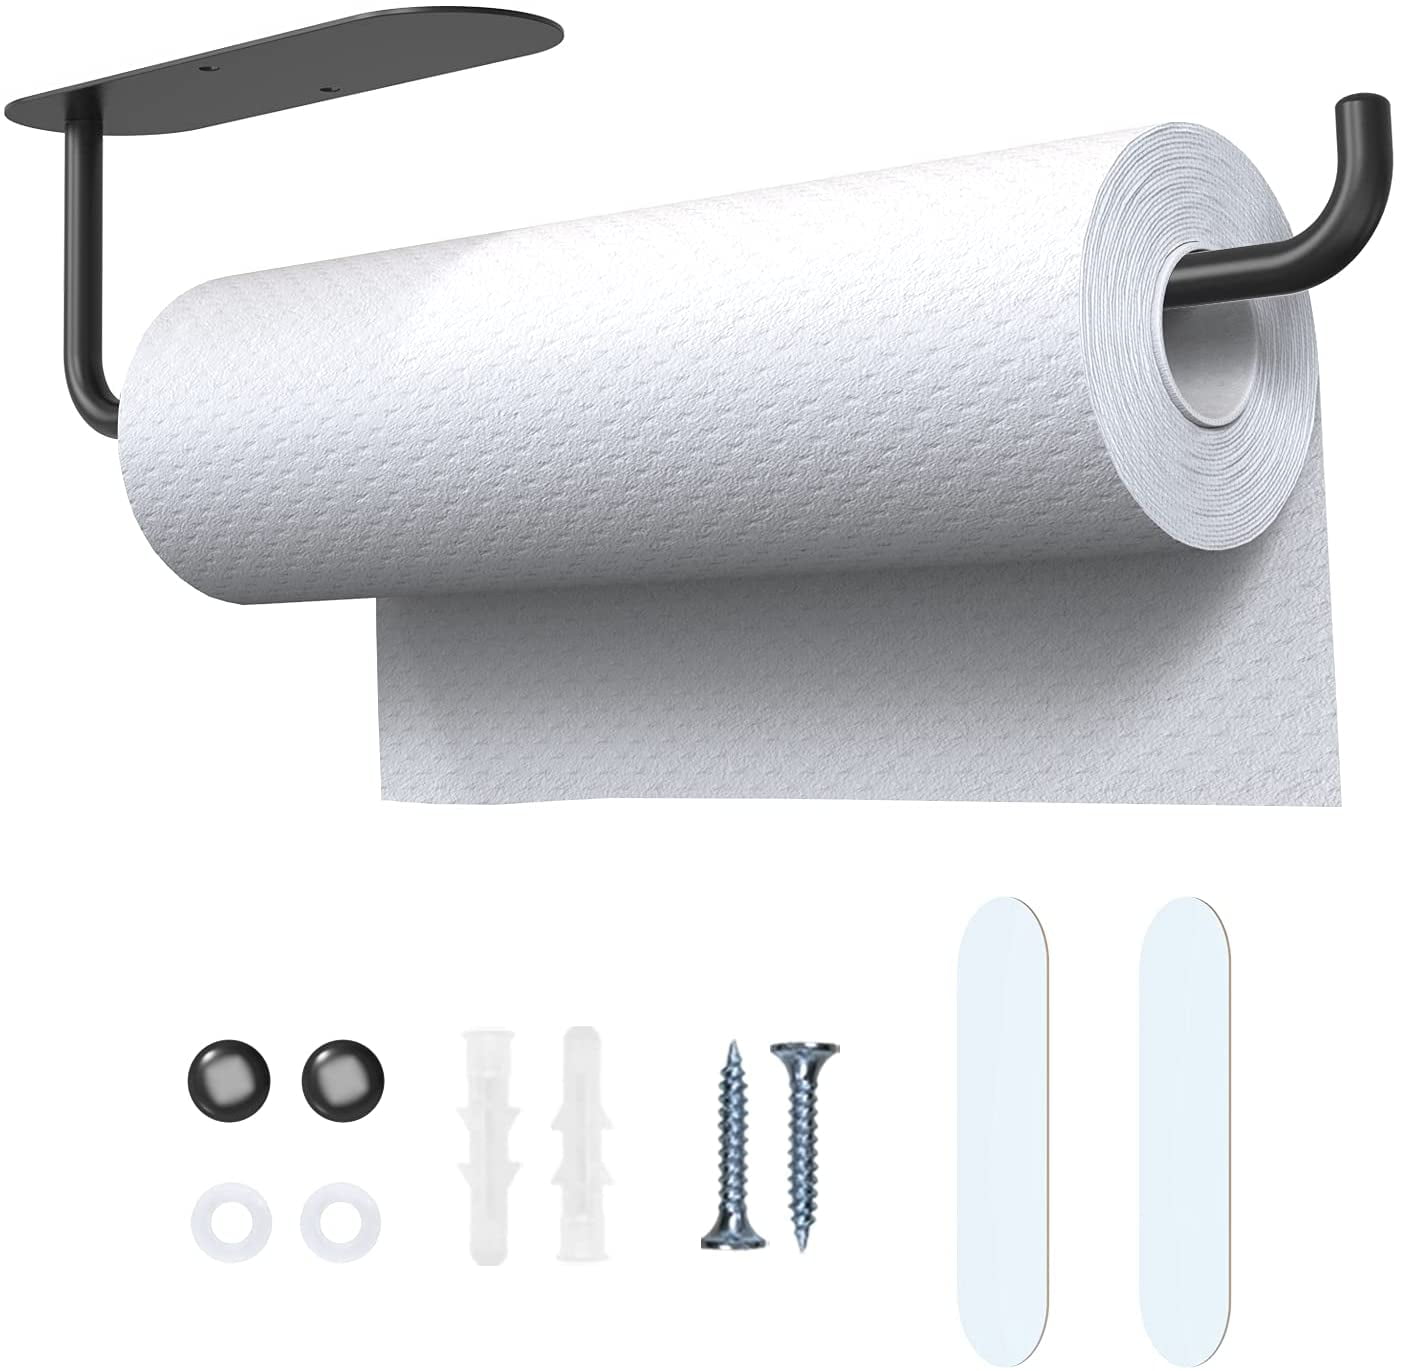 Self Adhesive or Screw Mounting Countertop Paper Towel Holder Wall Mount SUS304 Stainless Steel Paper Towel Holder Under Cabinet for Kitchen Cabinet Bathroom Paper Towel Holder 